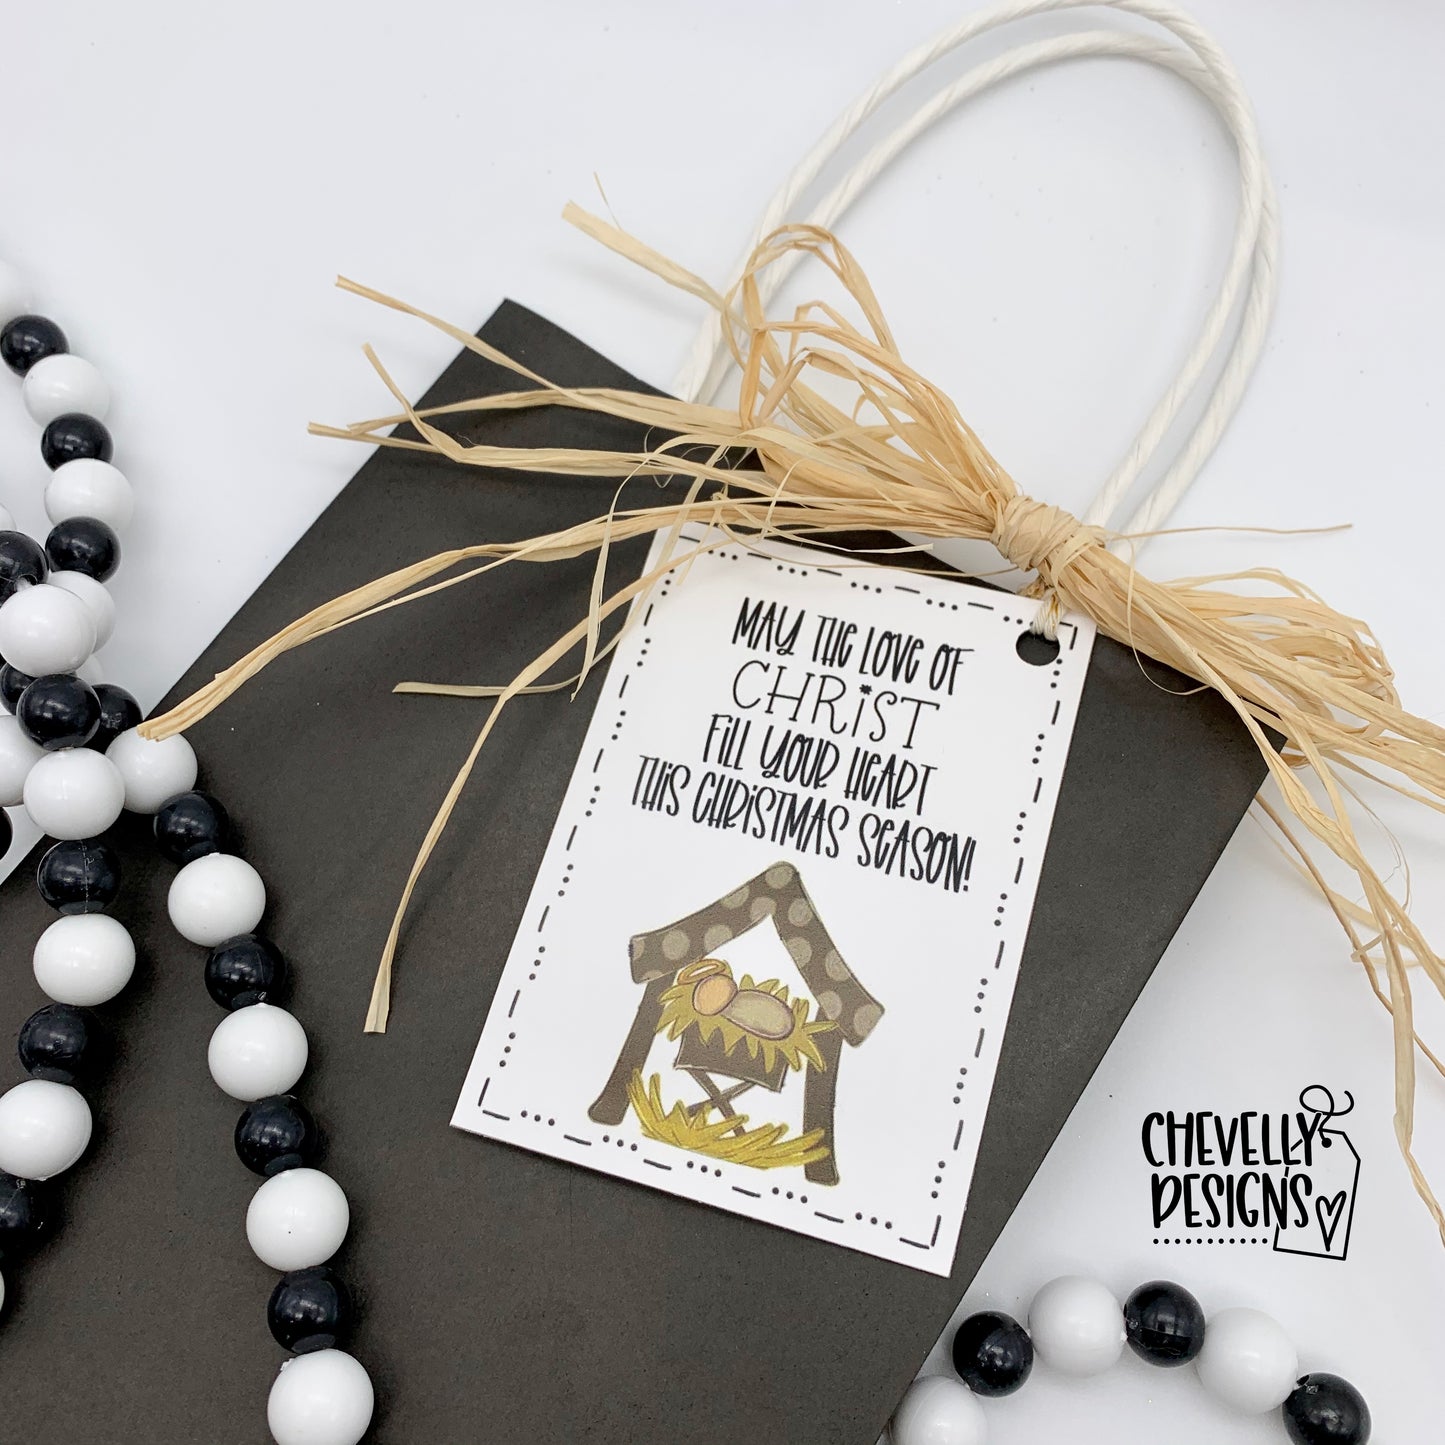 Printable Nativity Christmas Gift Tags >>>Instant Digital Download<<<